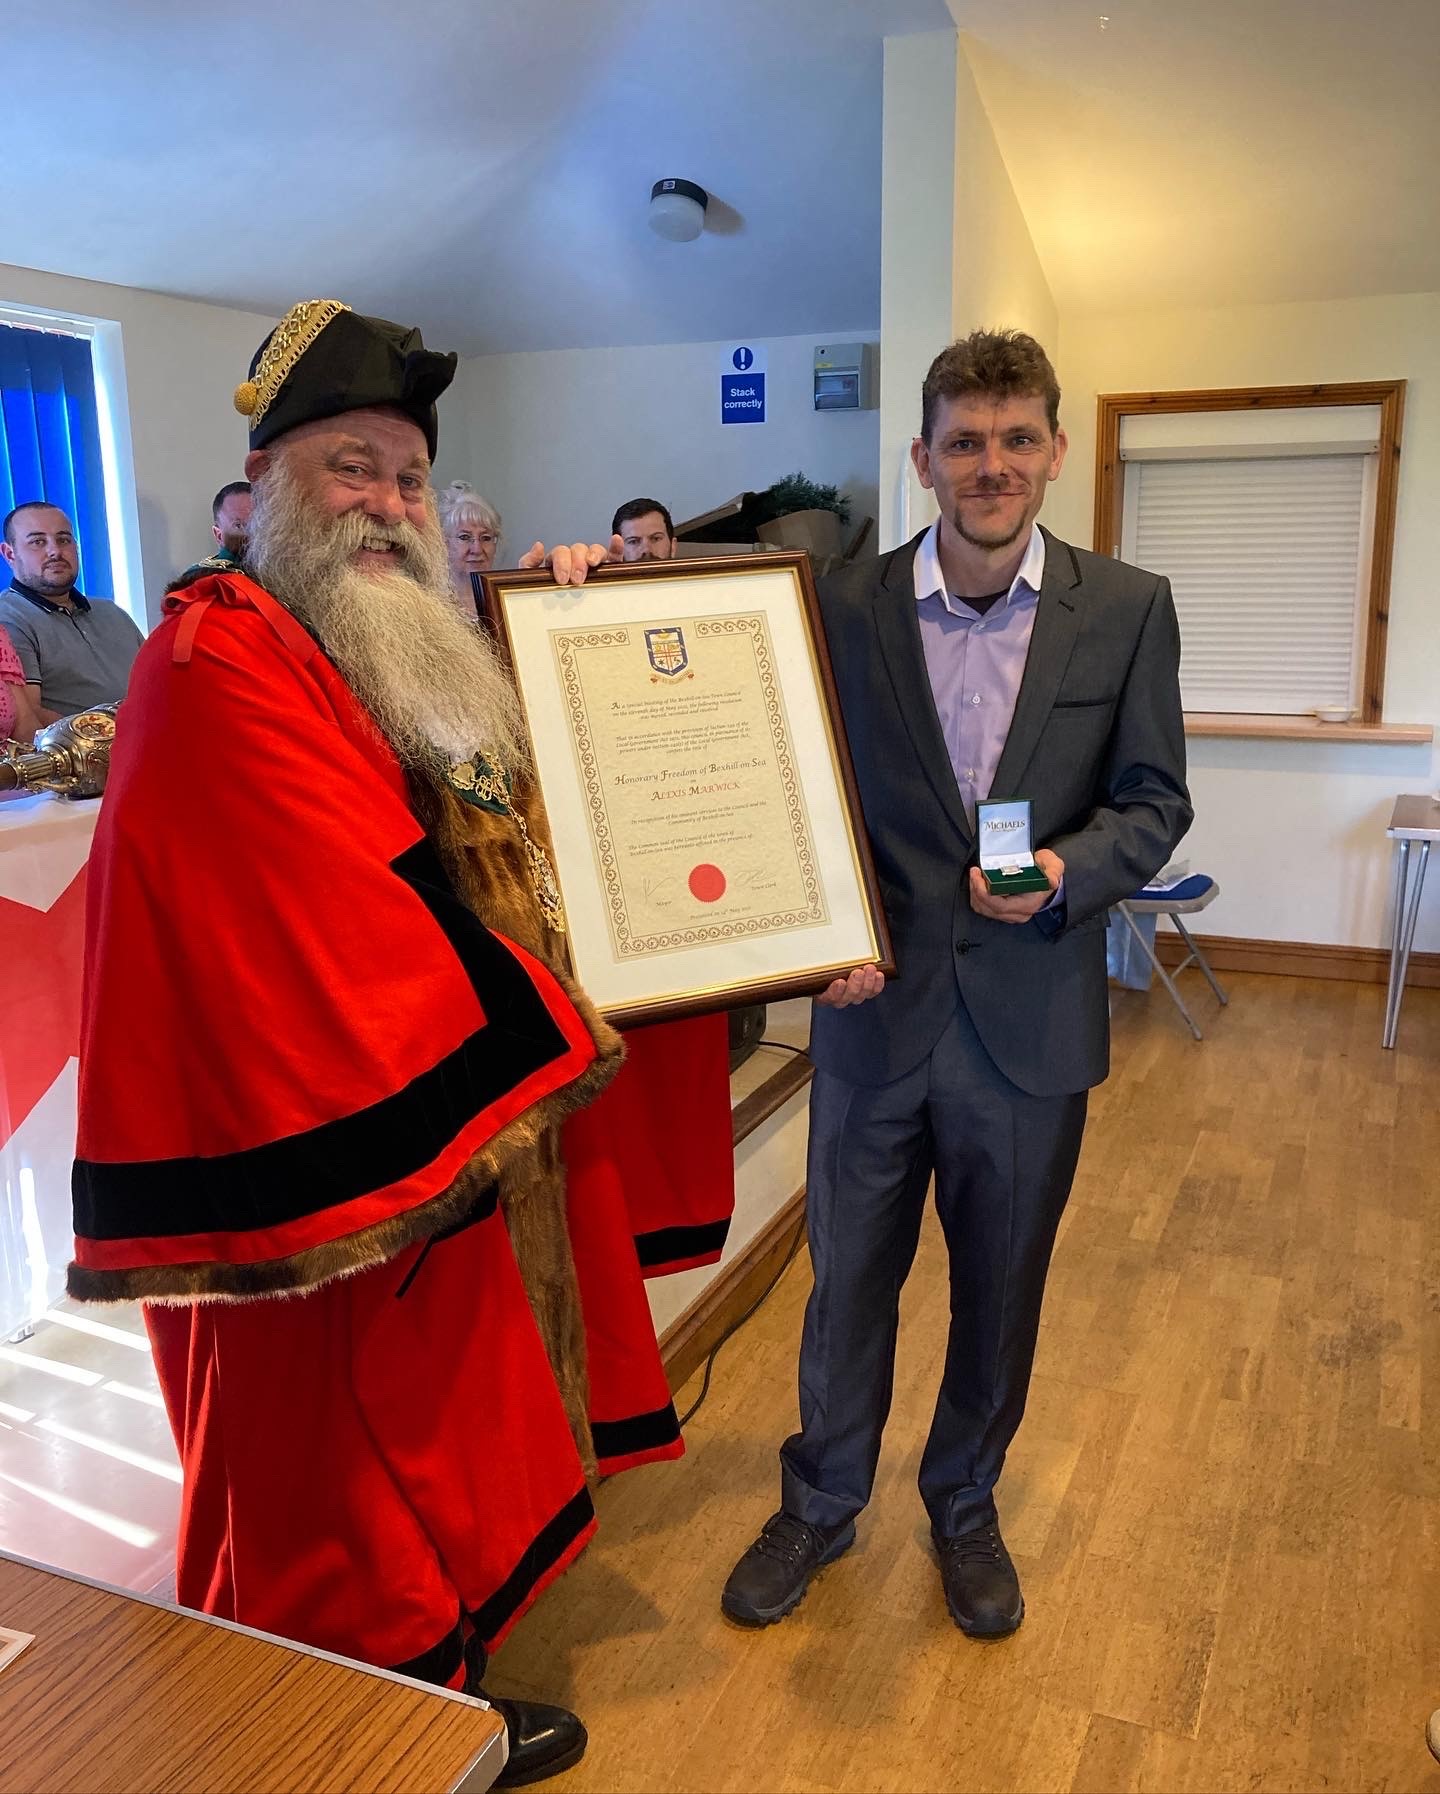 Alex receiving the Freedom of Town from Cllr Paul Plim, Town Mayor